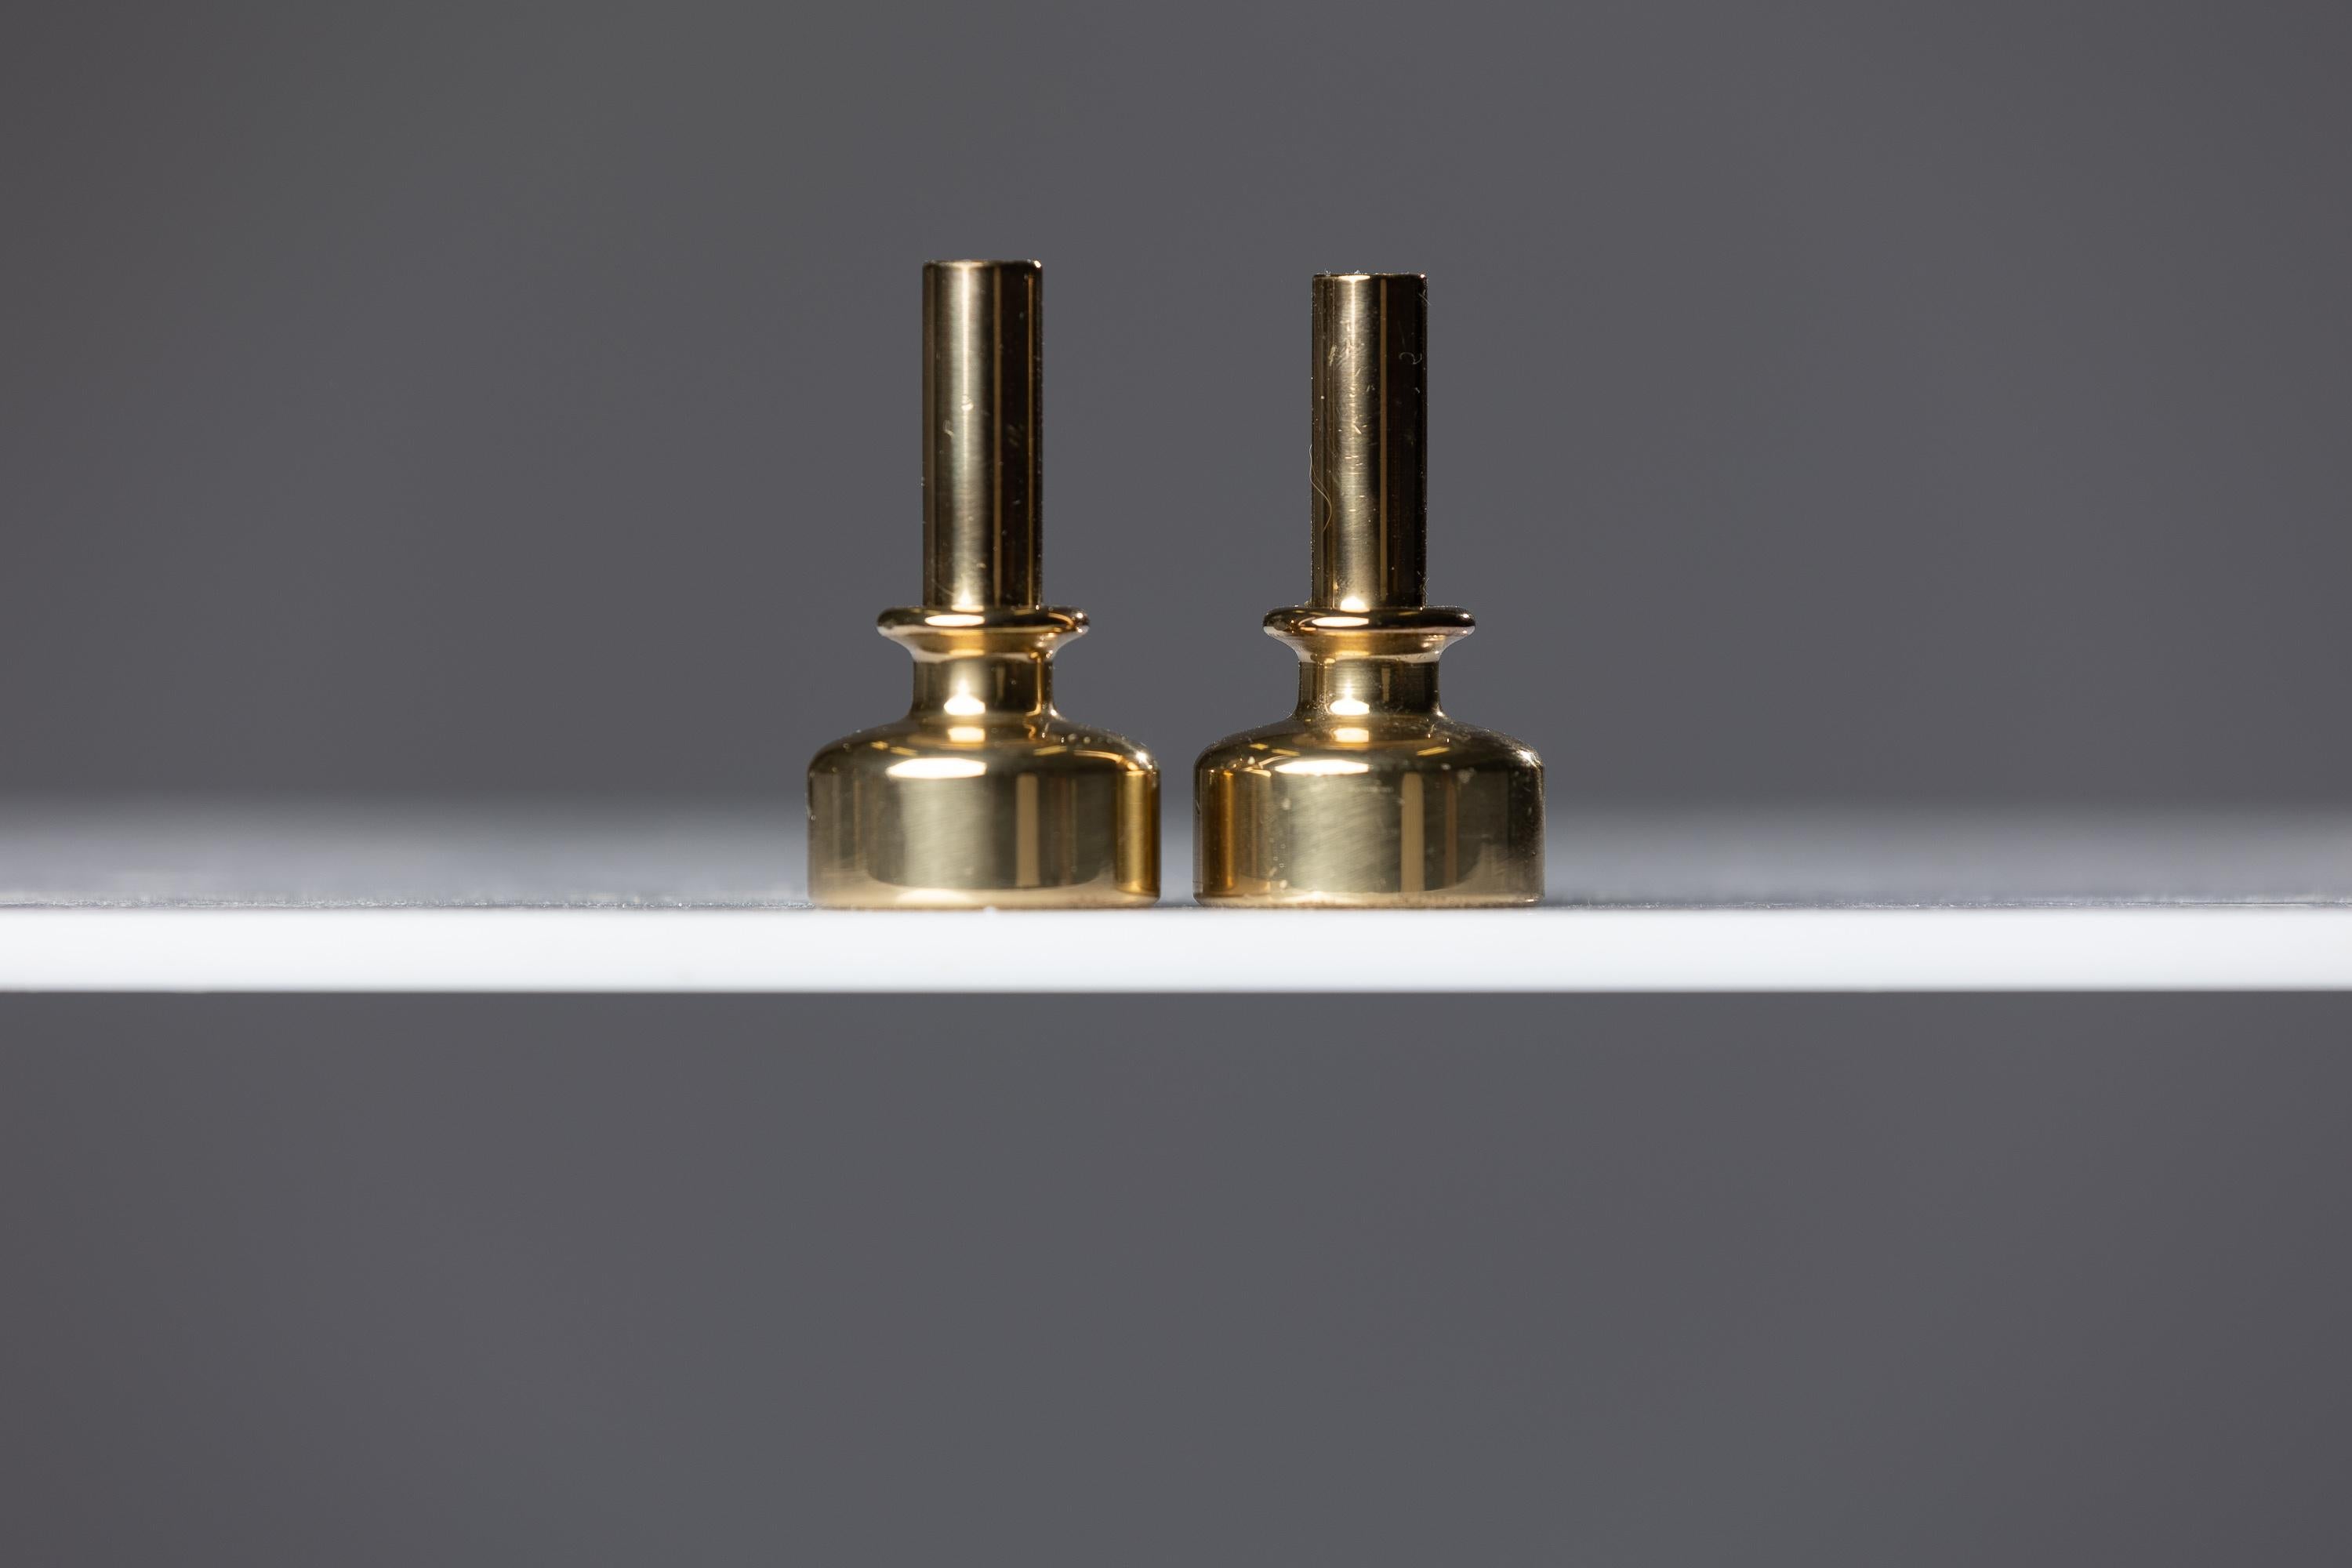 Immerse yourself in the timeless beauty of Hans-Agne Jacobson brass candlesticks, a quintessential embodiment of a Modern style from the mid-century era. Crafted with exceptional artistry and attention to detail, these brass candlesticks exude an